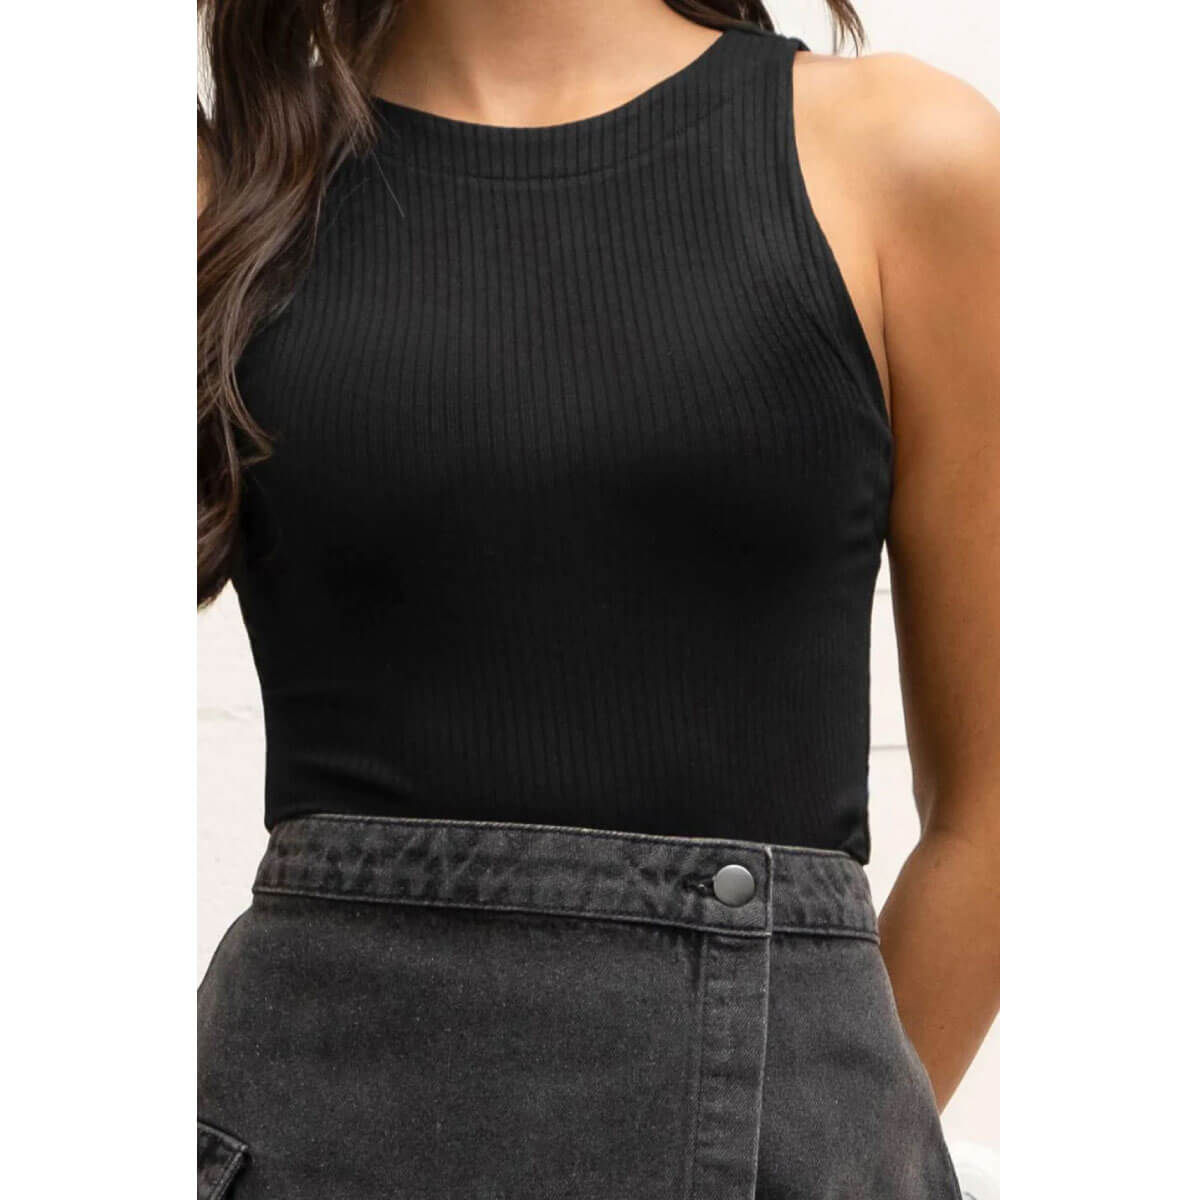 Fitted Ribbed Knit Tank Top black front | MILK MONEY milkmoney.co | cute tops for women. trendy tops for women. cute blouses for women. stylish tops for women. pretty womens tops.